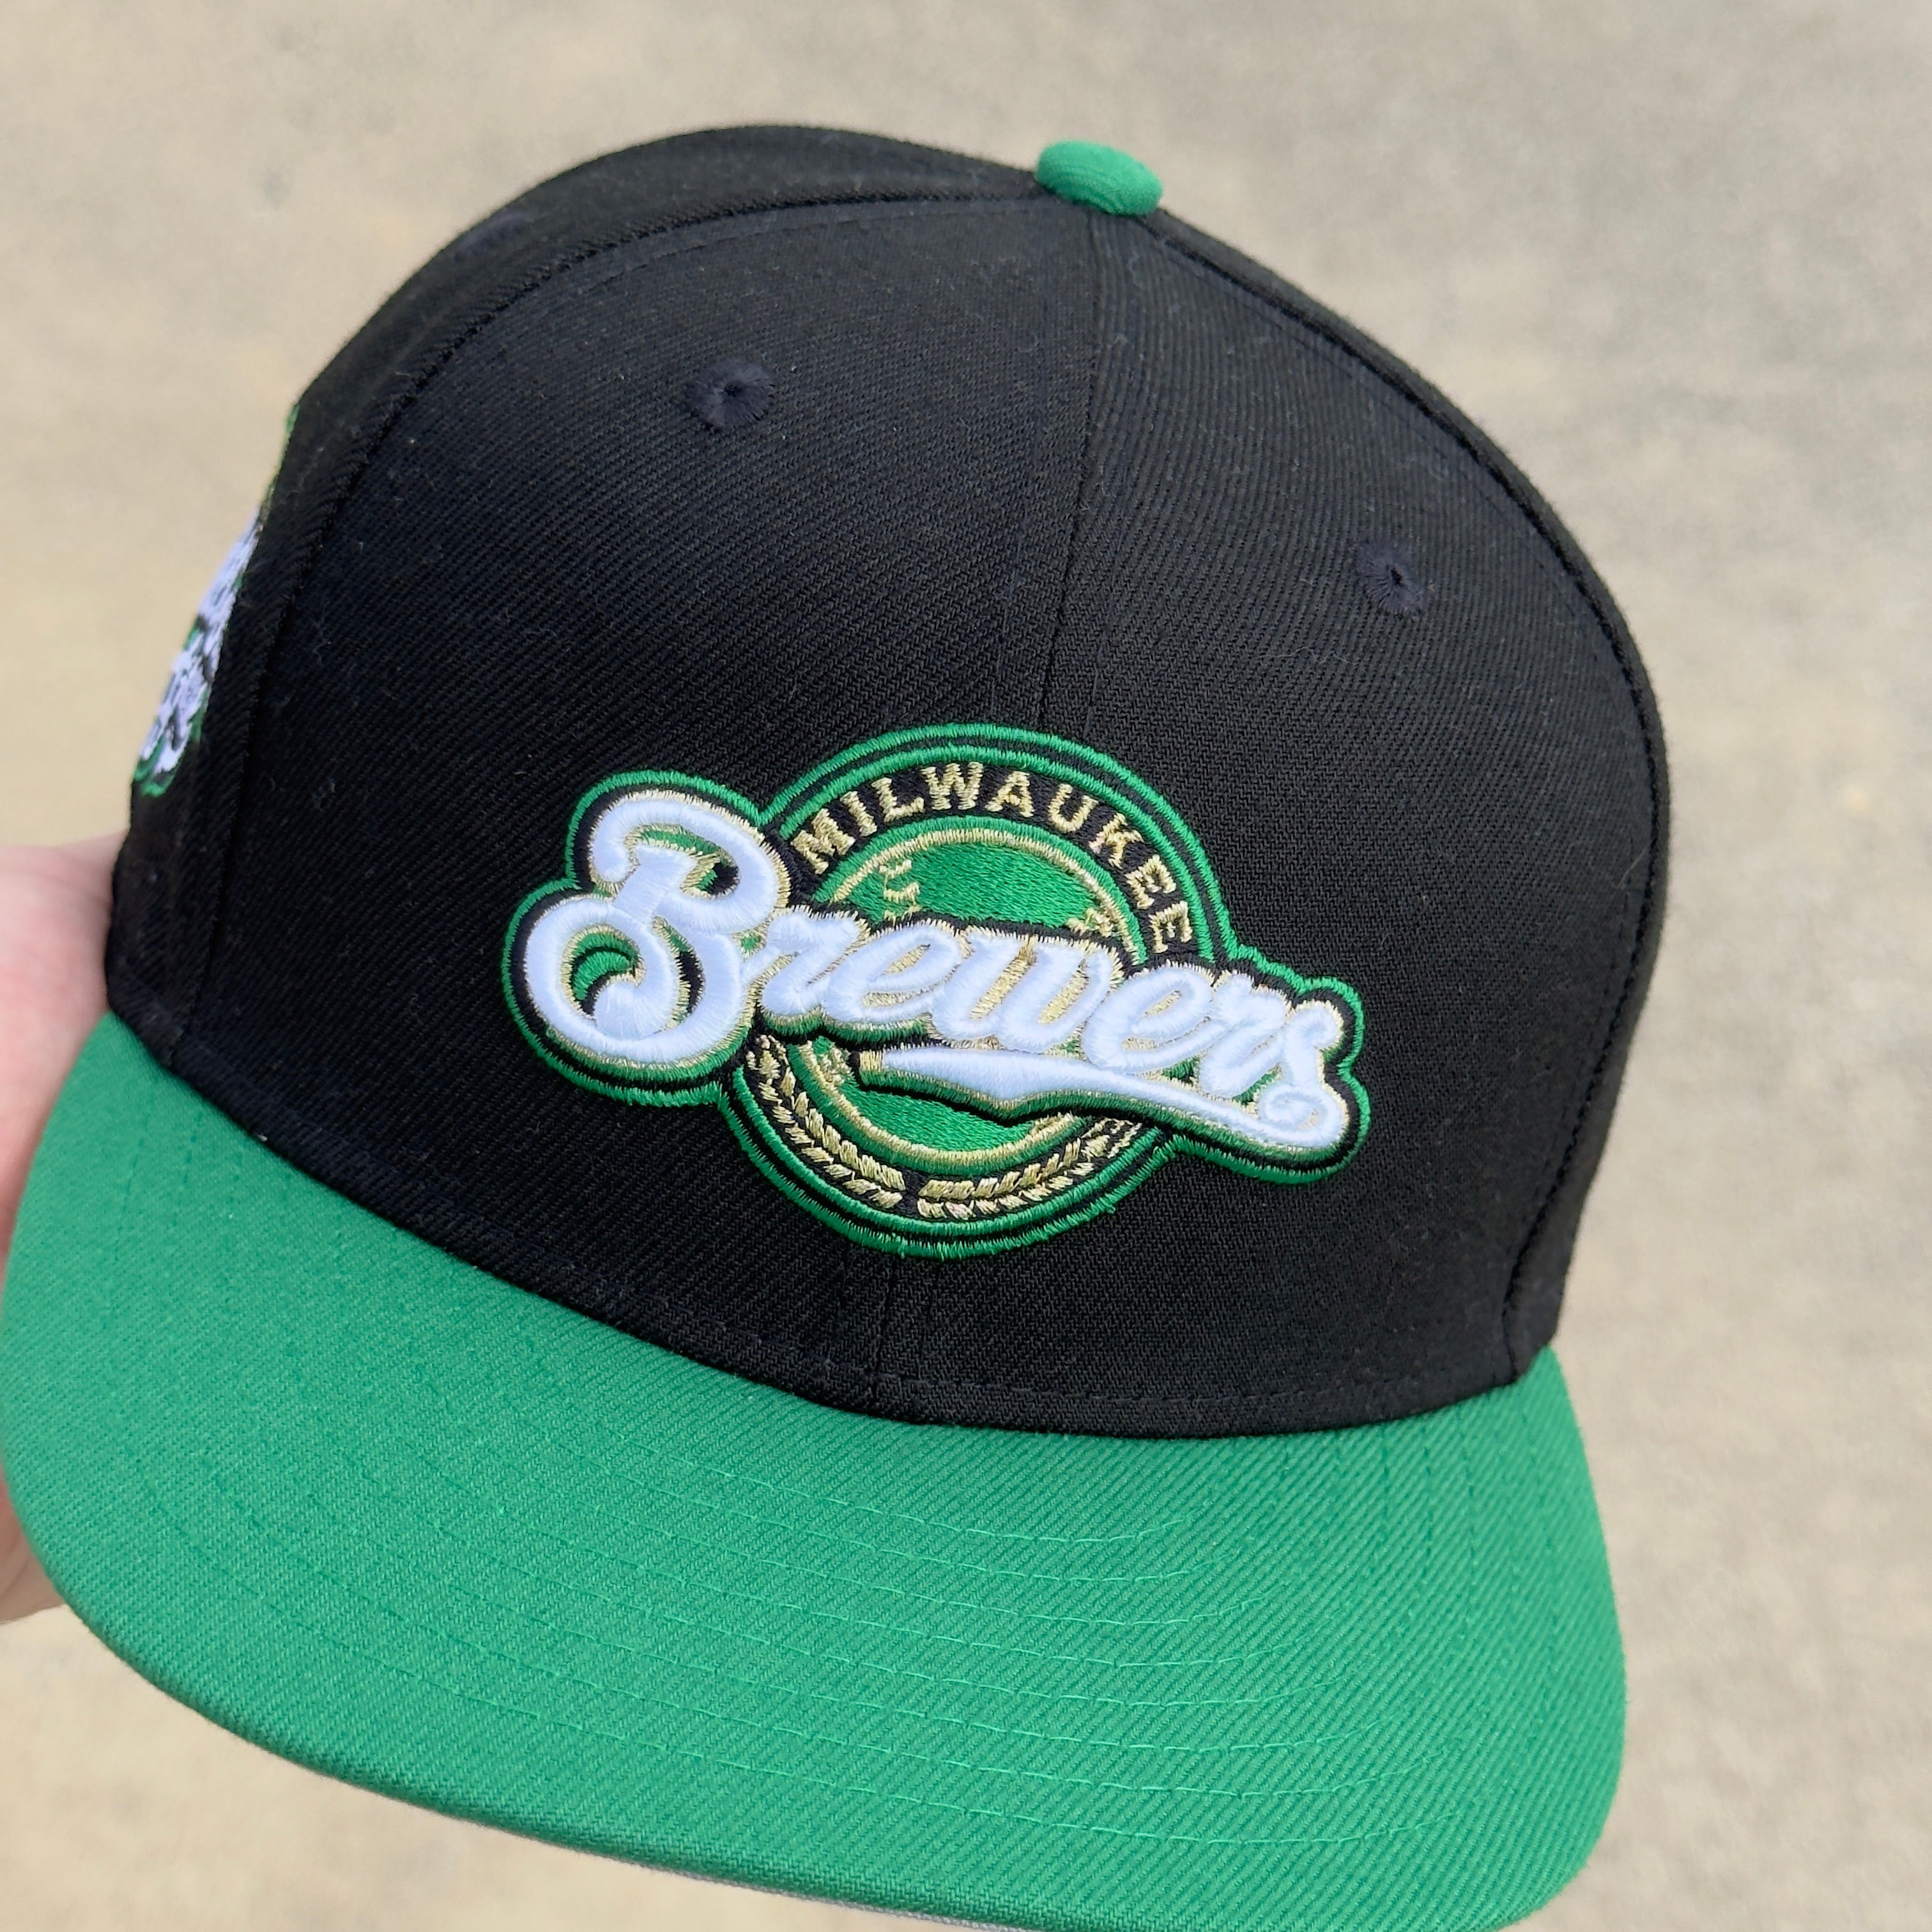 1/8 USED Black Milwaukee Brewers All Star Game Green 59fifty New Era Fitted Hat Cap